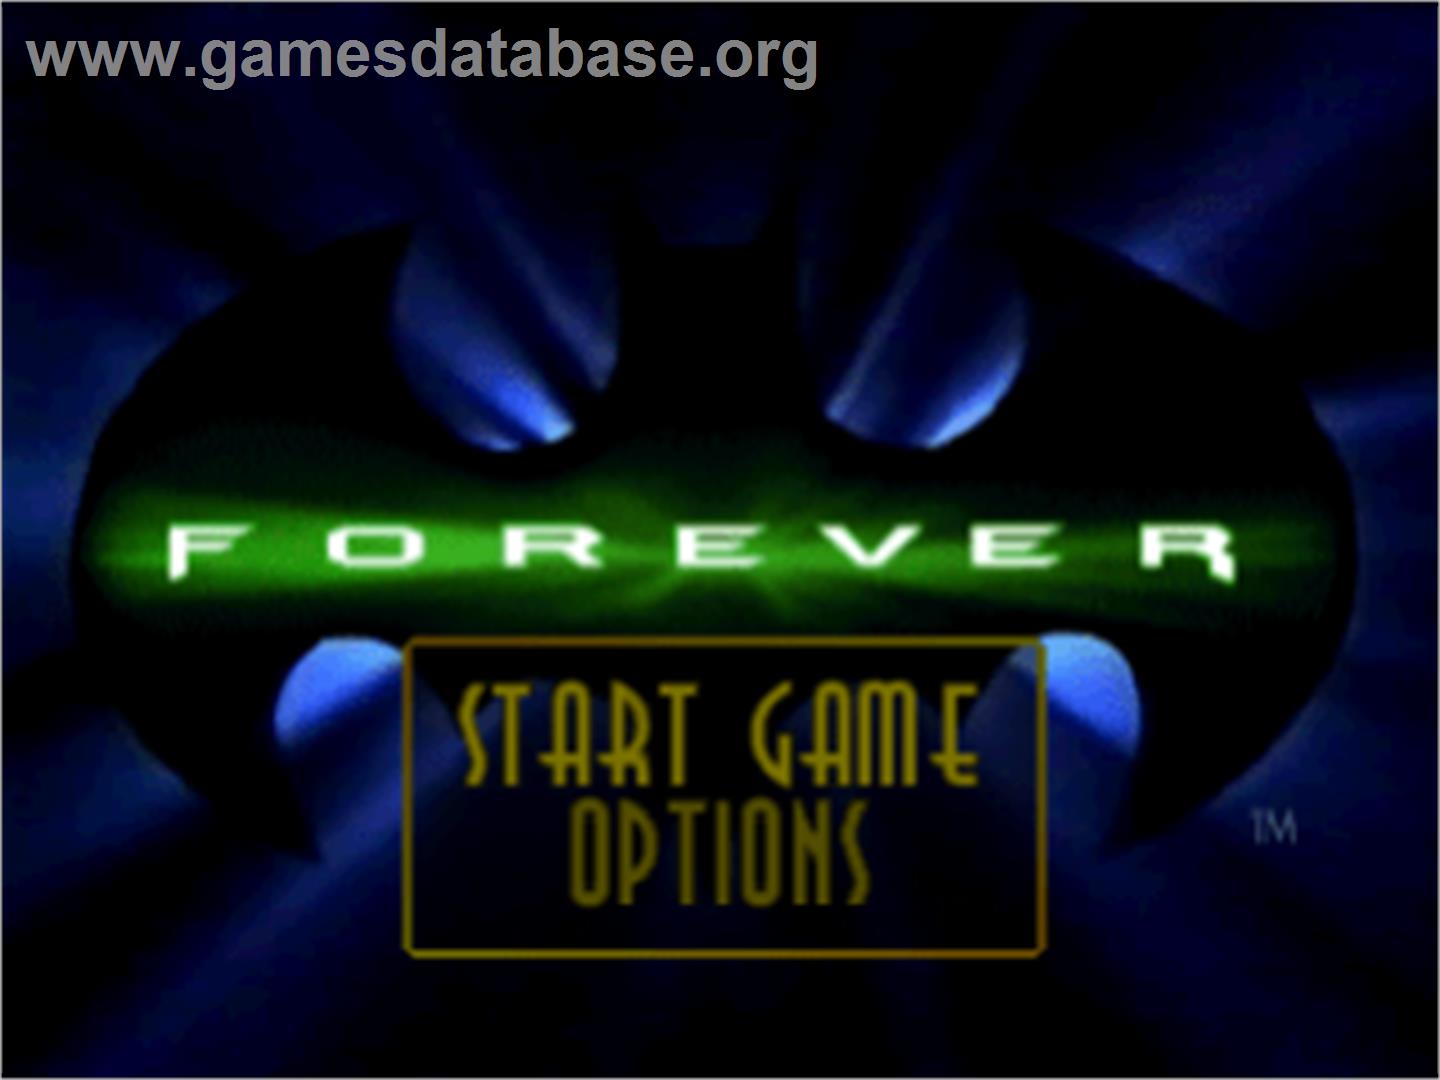 Batman Forever: The Arcade Game - Sony Playstation - Artwork - Title Screen